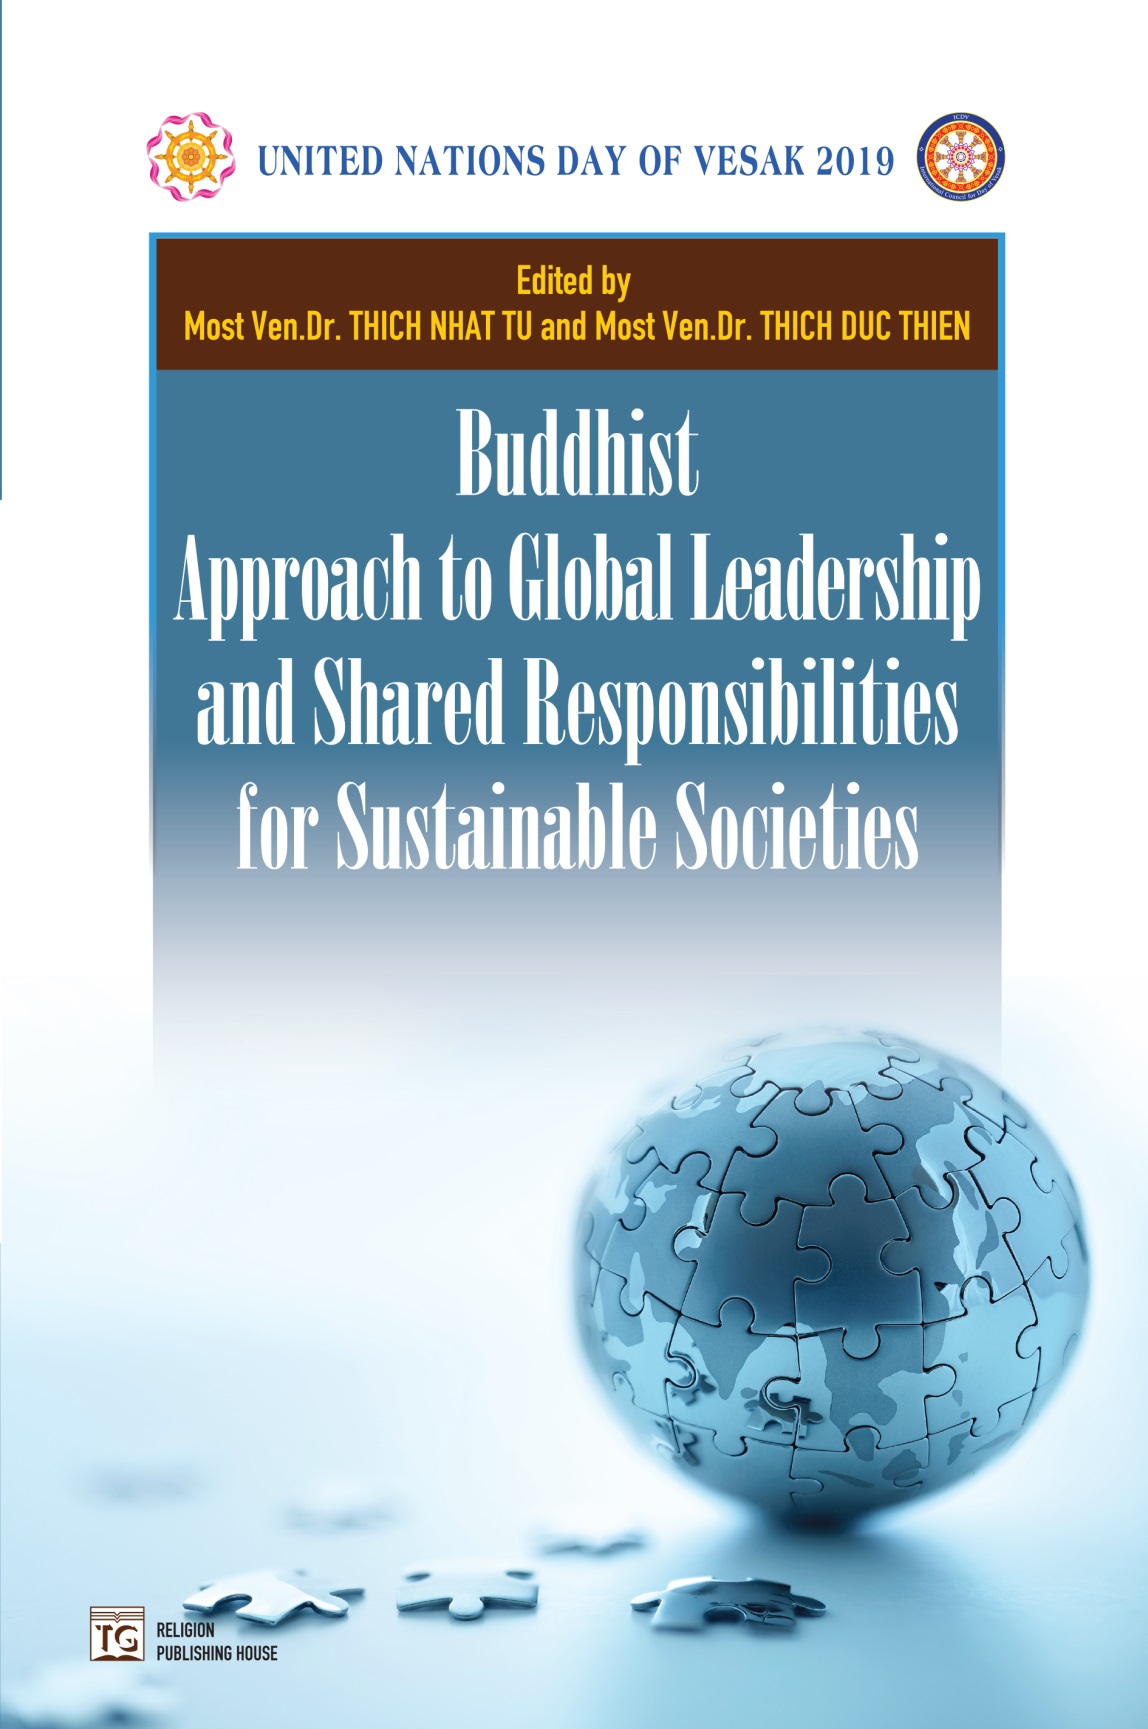 Buddhist approach to global leadership and shared responsibilities for sustainable societies